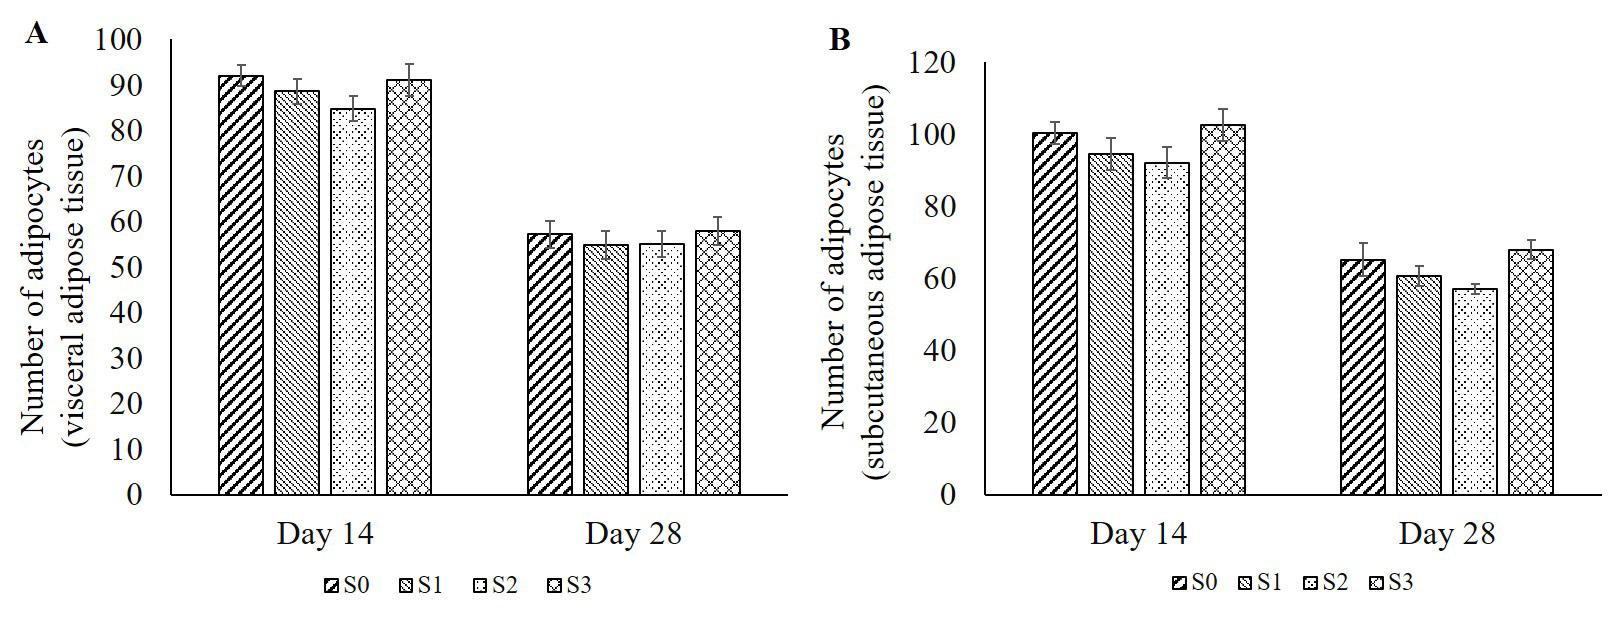 Effects of Clove and Tulsi supplementation on the dynamics and cellularity of adipose tissue in the visceral and subcutaneous fat depots in Broiler